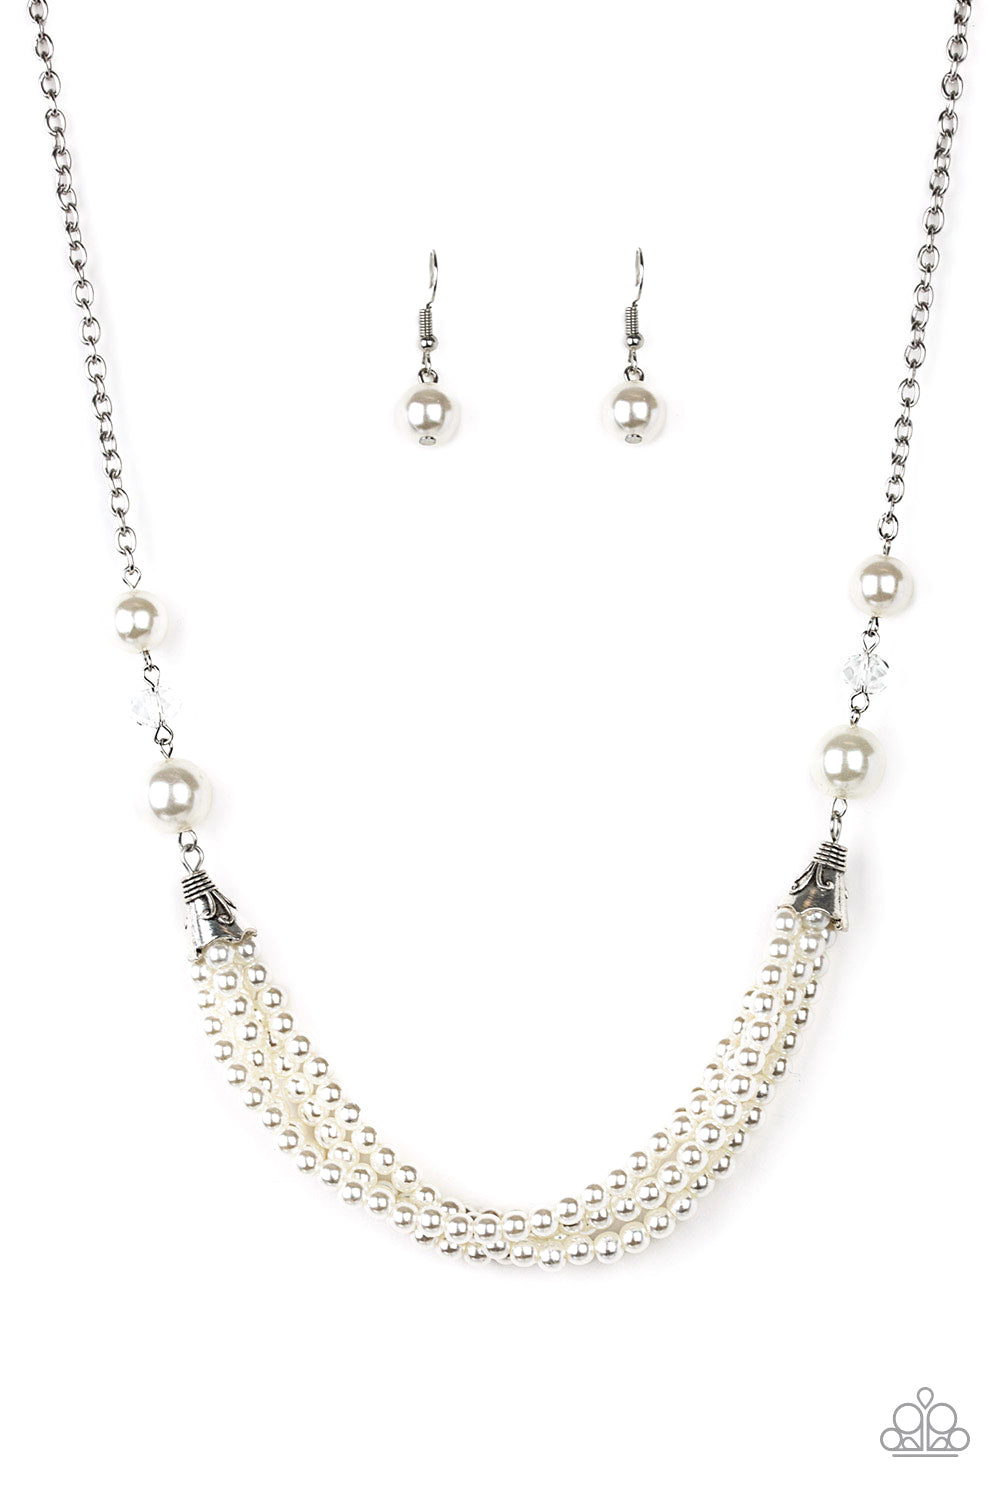 Oversized white pearls and crystal-like beads chocker style.